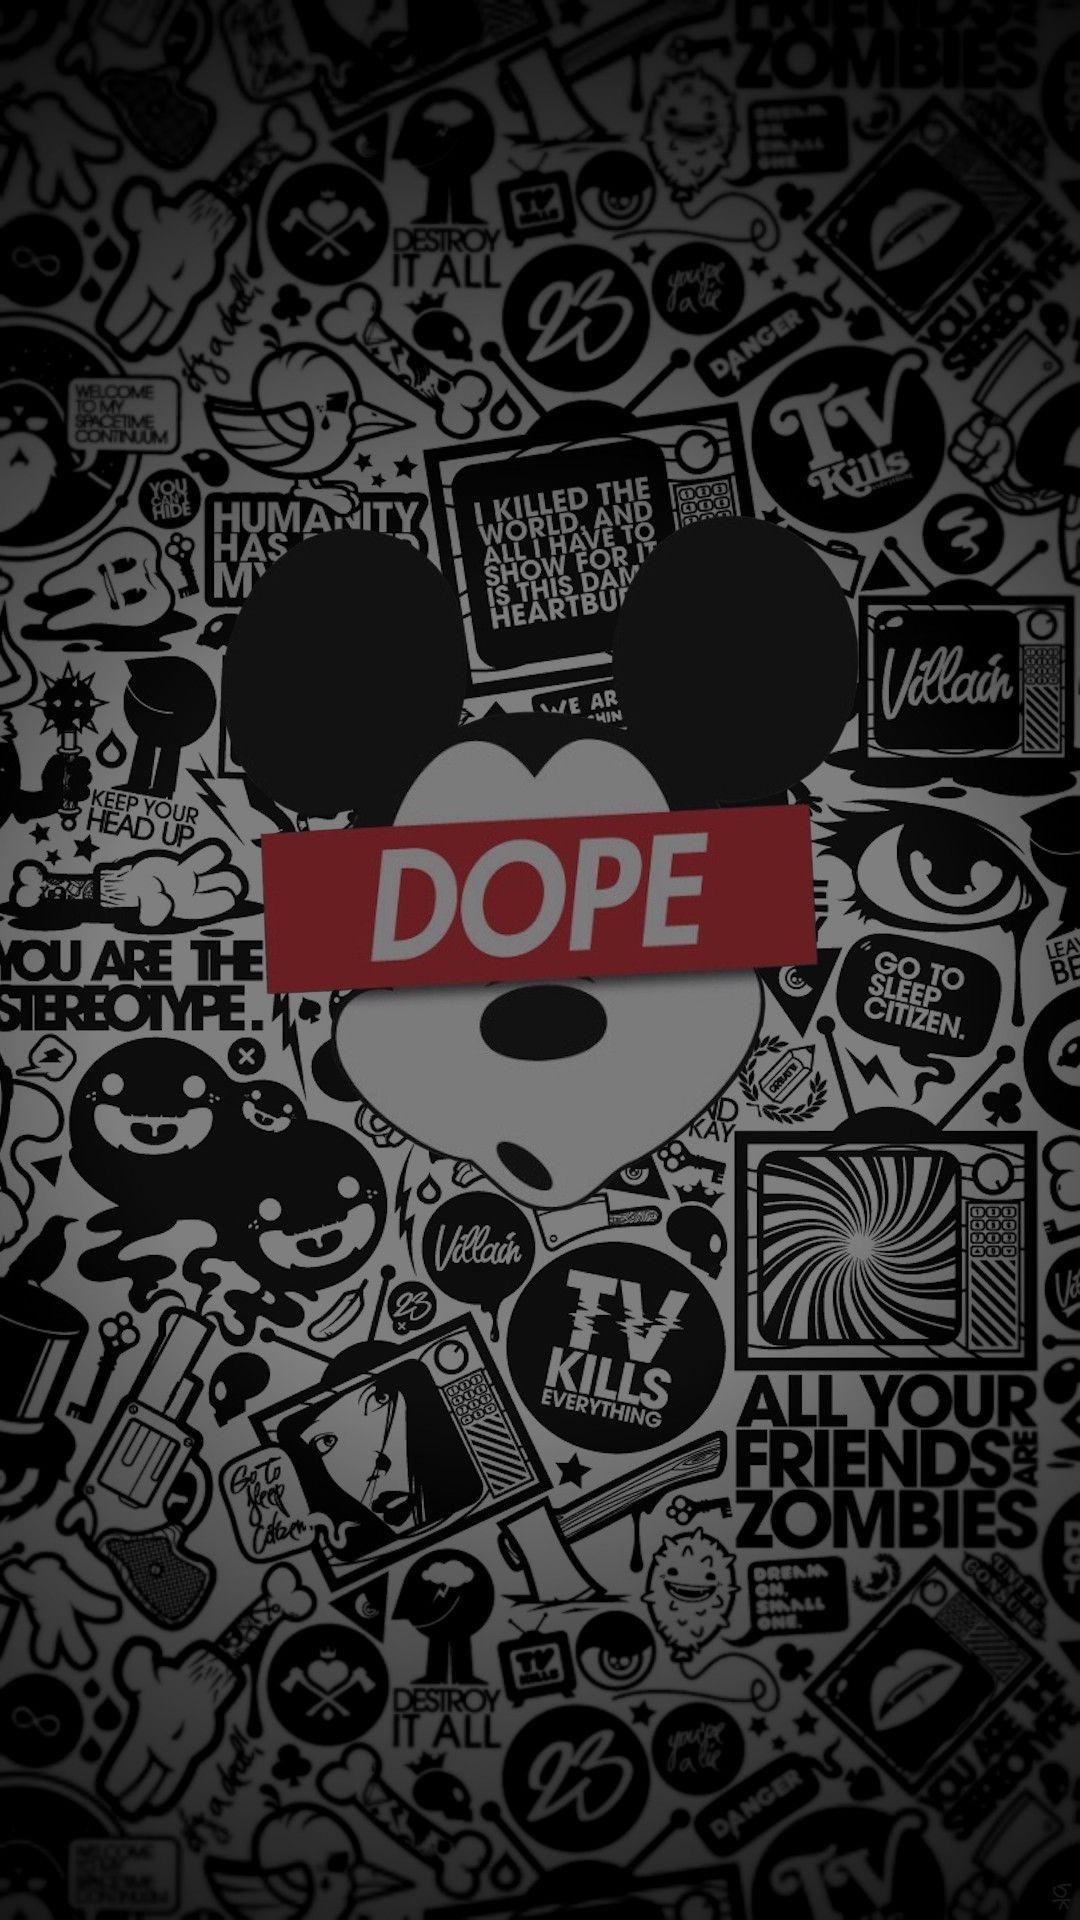 dope wallpapers